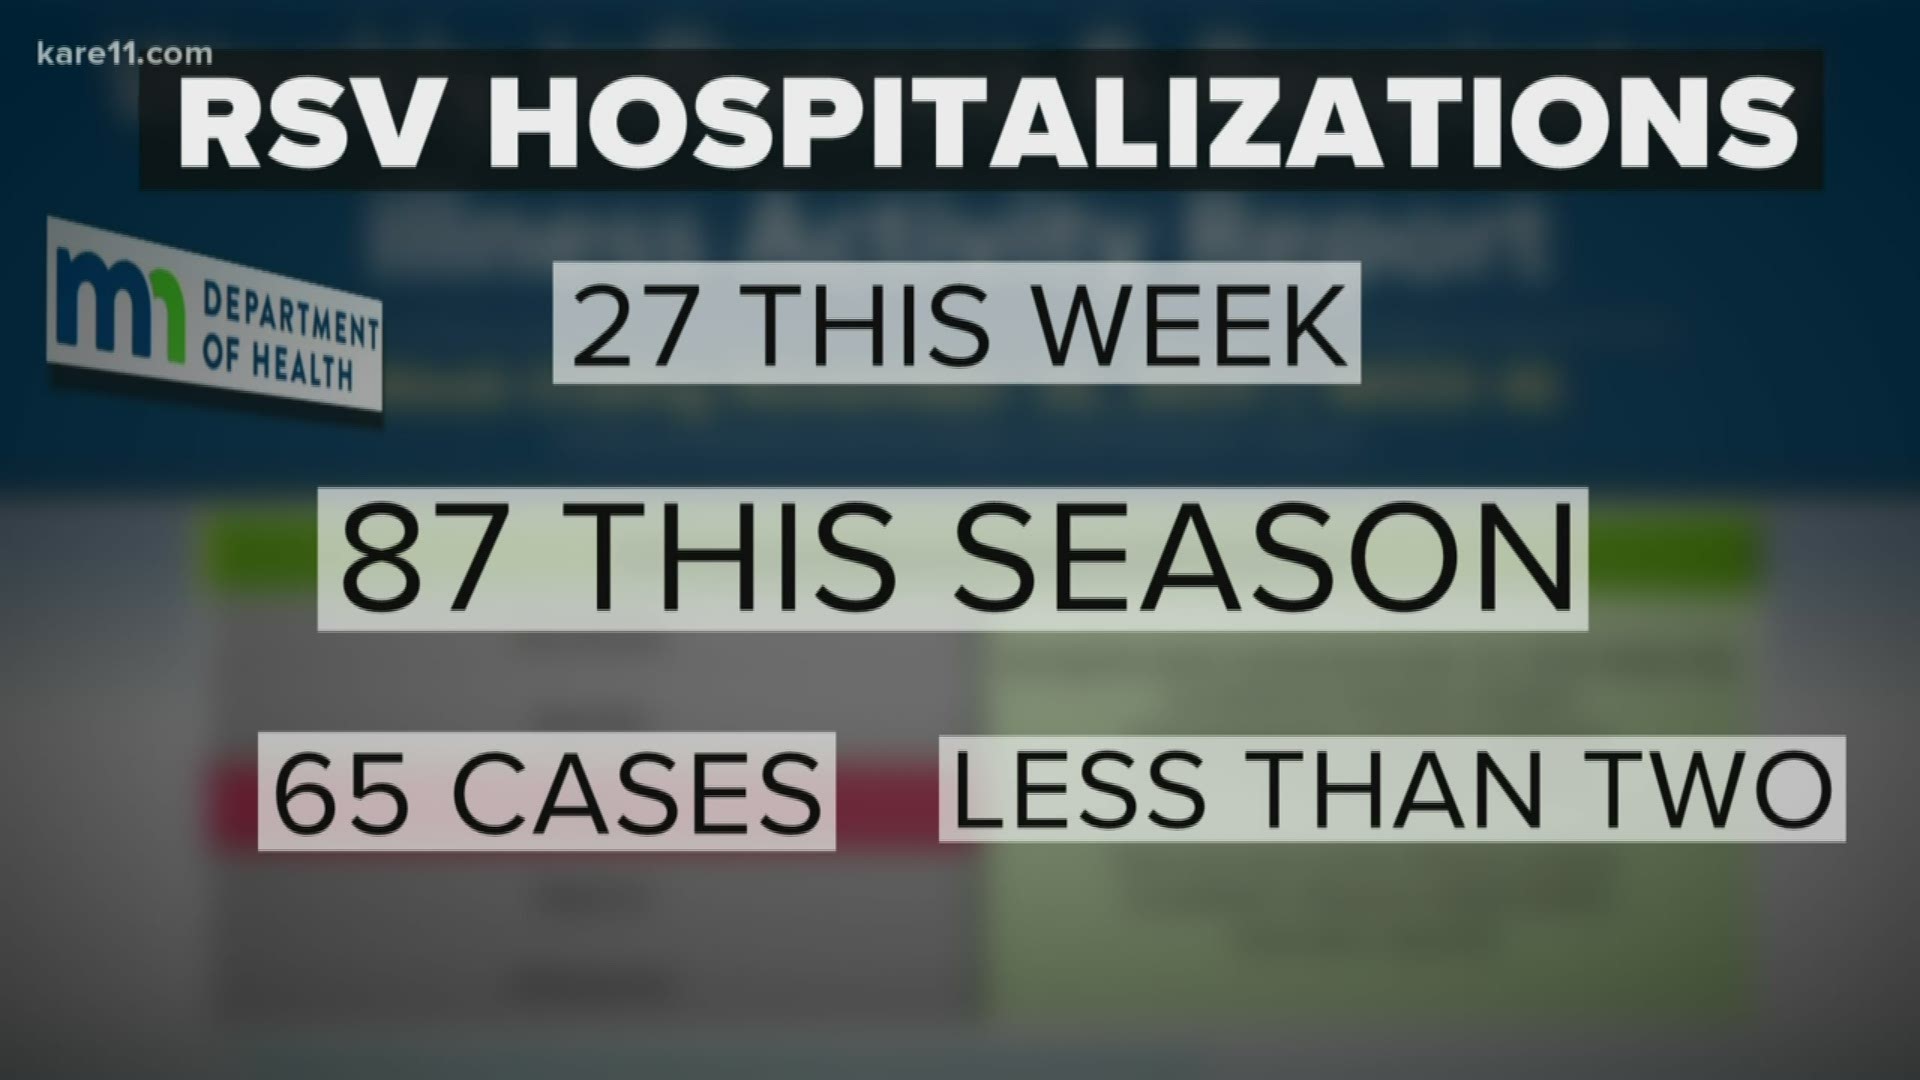 According to a weekly report from MDH, there were 27 RSV hospitalizations in just the last week, making 87 so far this season.